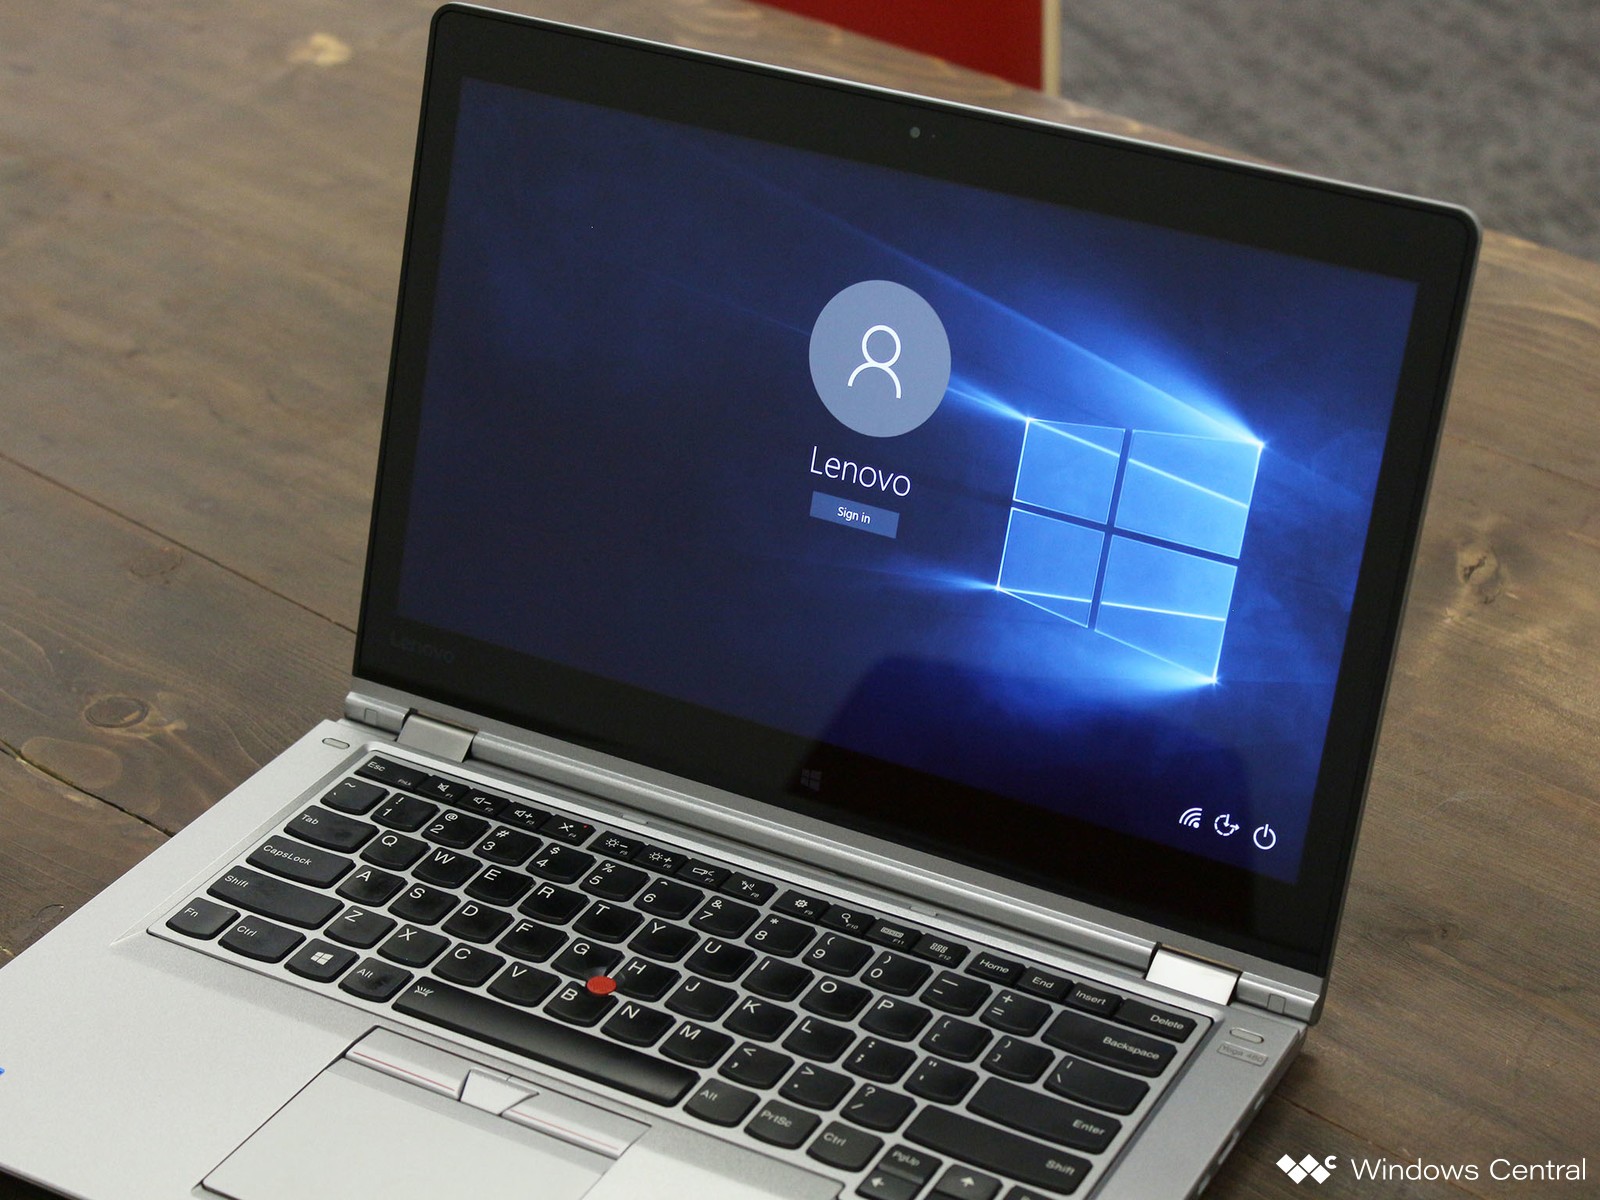 What You Need To Know Before A Clean Boot - Lock Screen Laptop Windows 10 - HD Wallpaper 